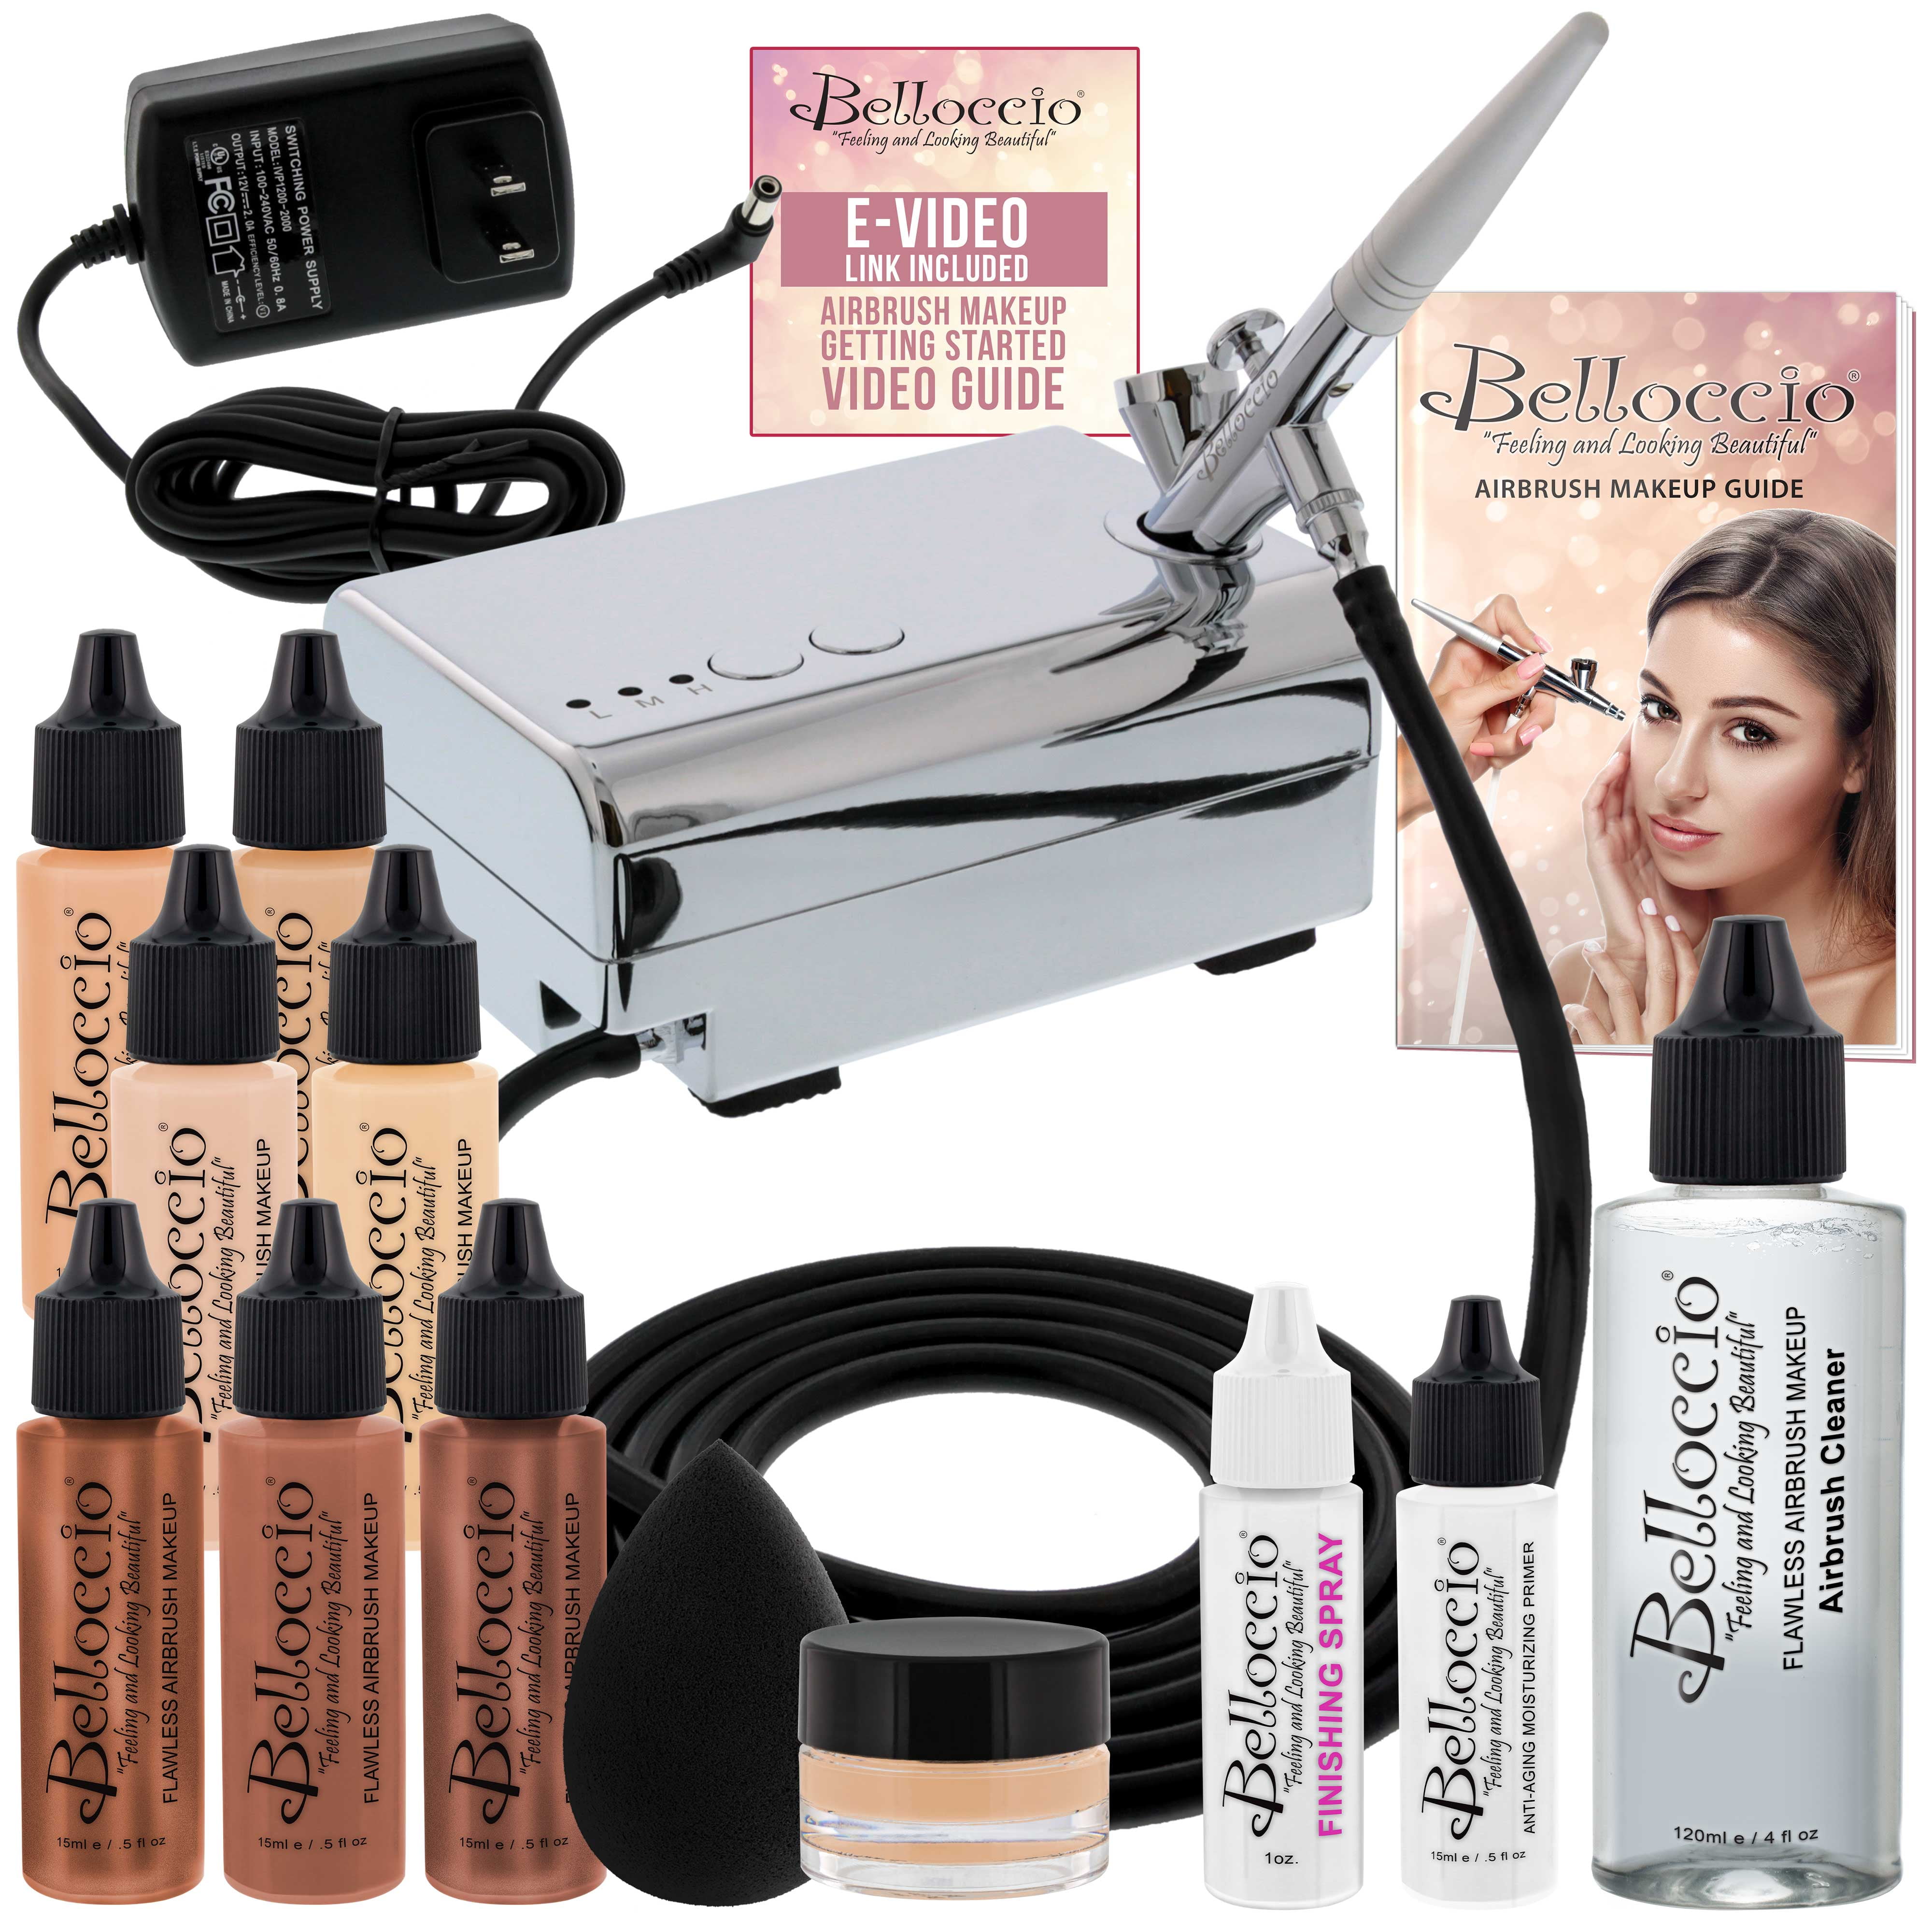 Belloccio BEAUTY DELUXE Airbrush Cosmetic Makeup System with 4 FAIR Shades of Foundation - Walmart.com